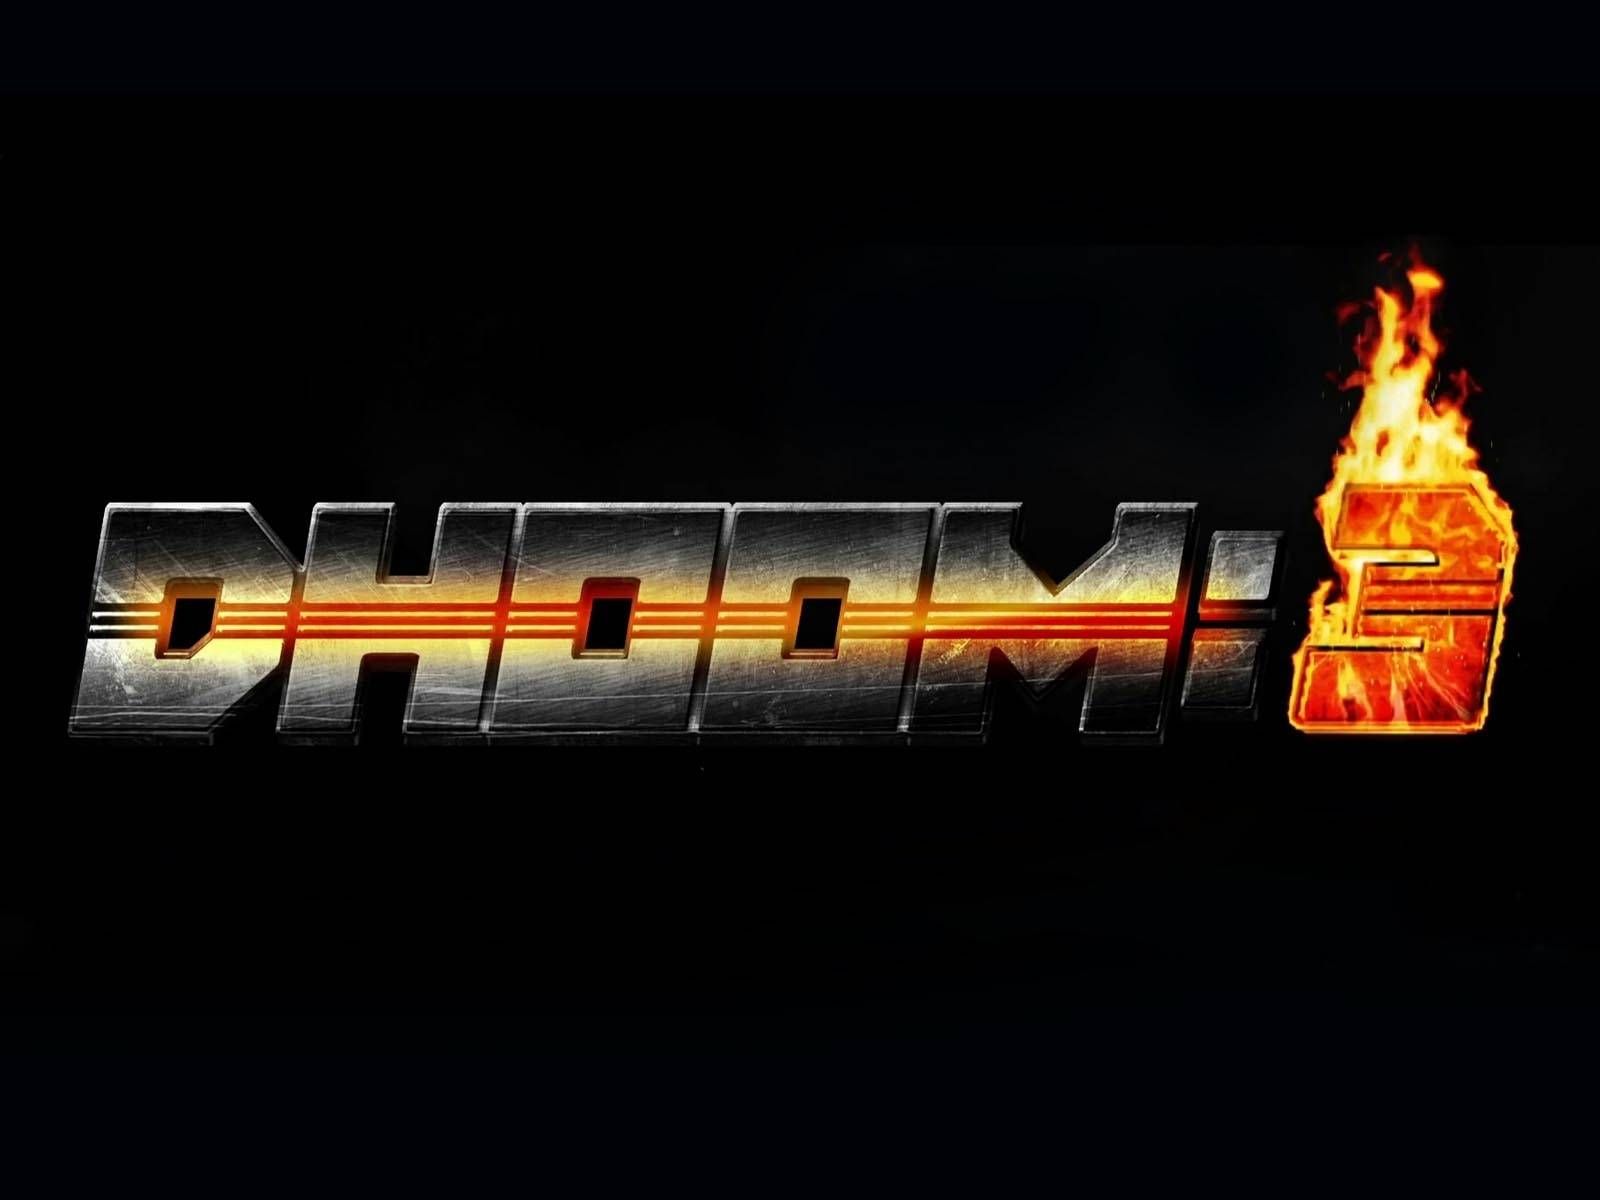 Dhoom-3 Fire Background Wallpaper - Dhoom 3 - HD Wallpaper 